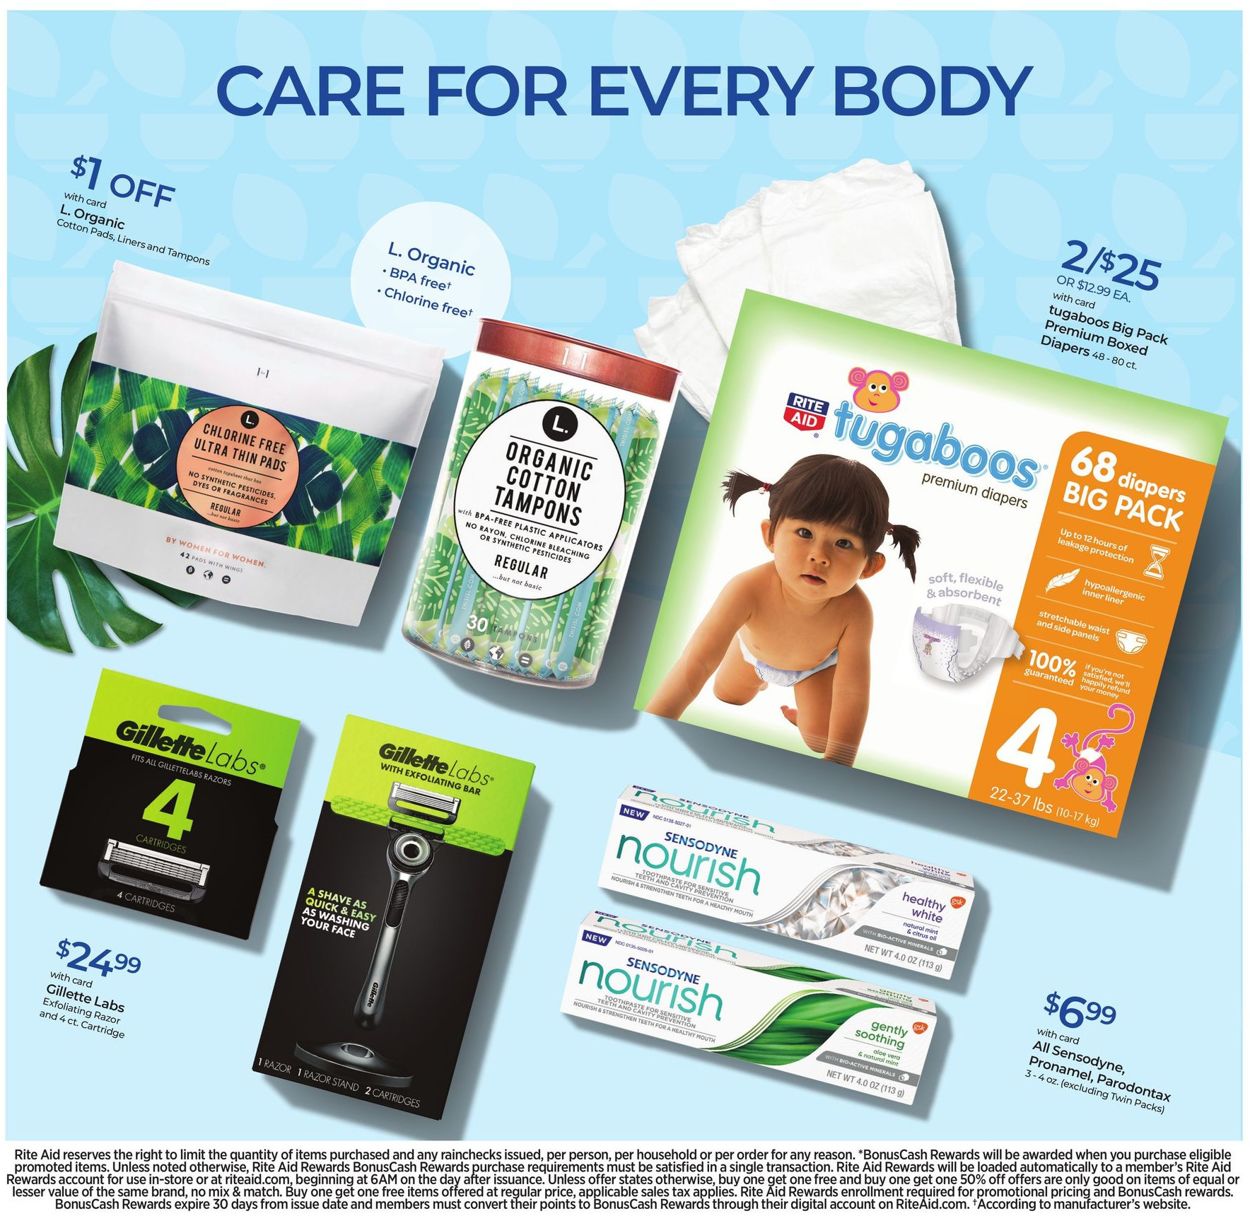 Rite Aid Ad from 03/20/2022